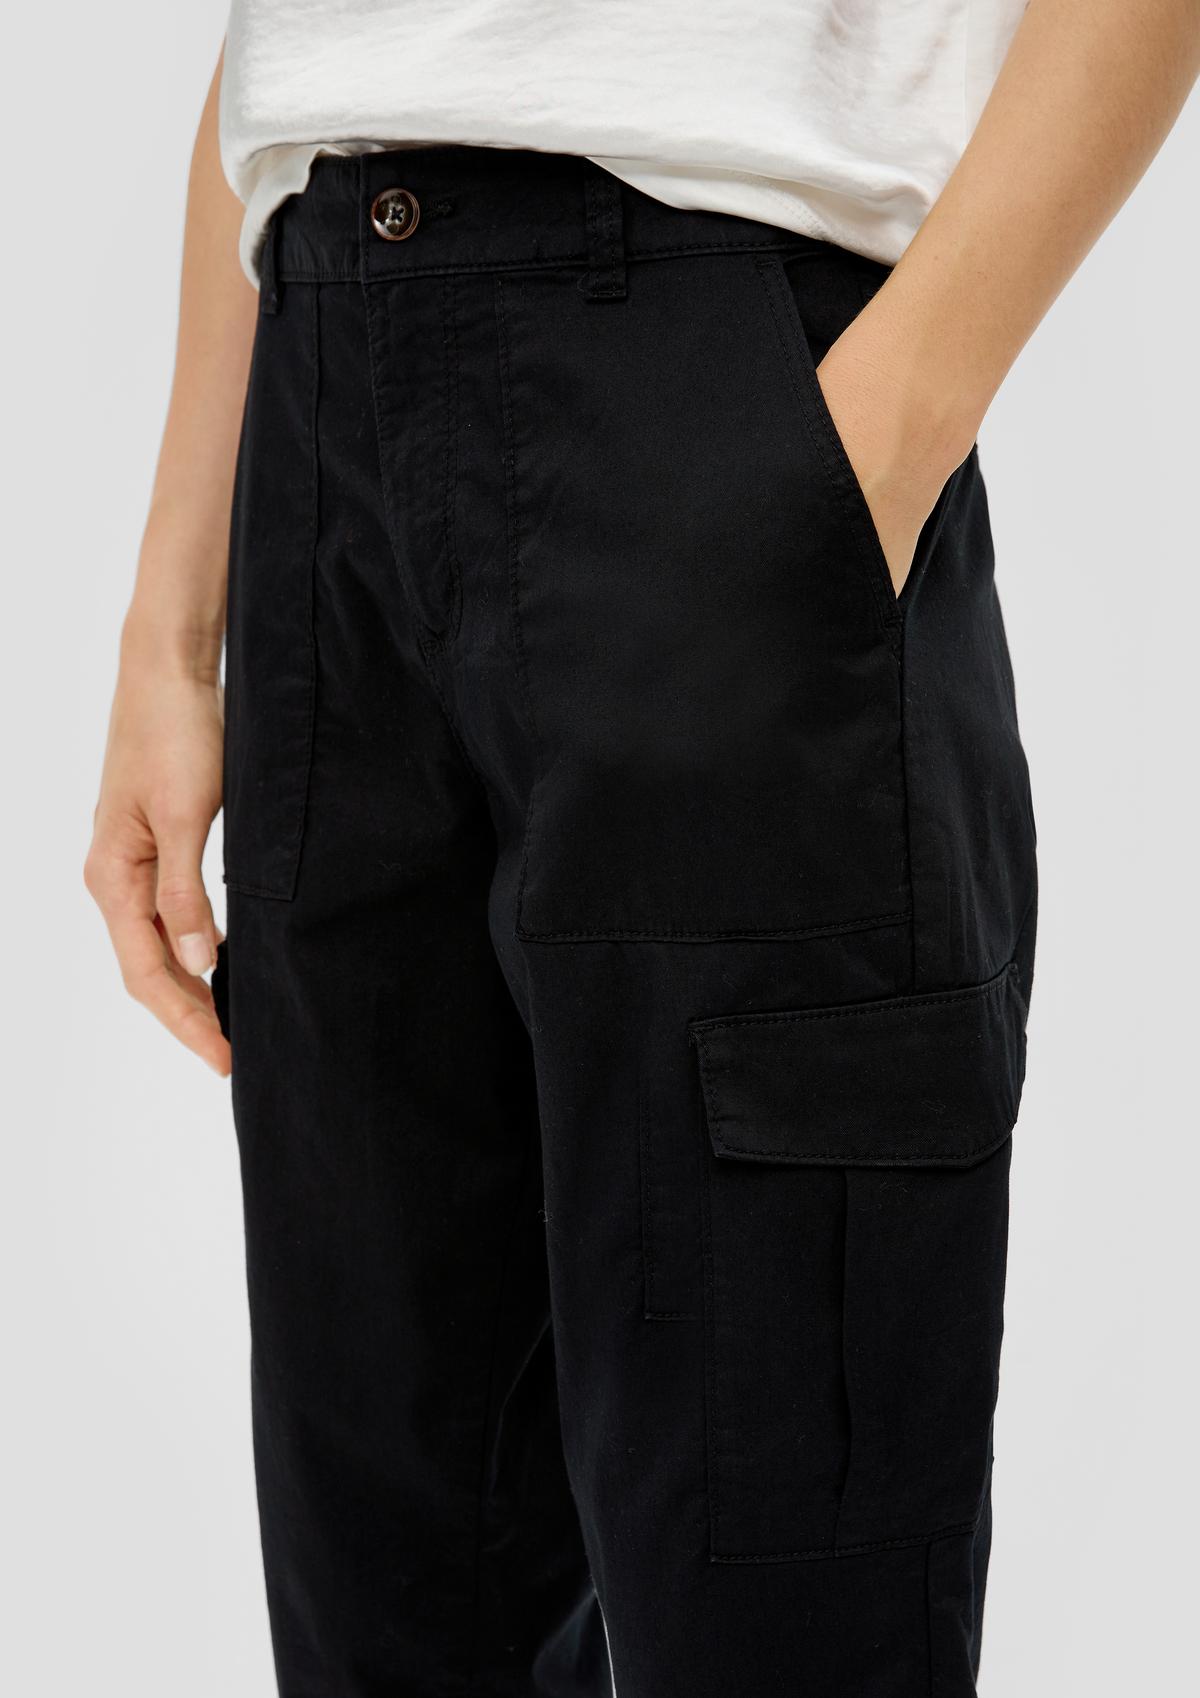 s.Oliver Tracksuit bottoms with cargo pockets